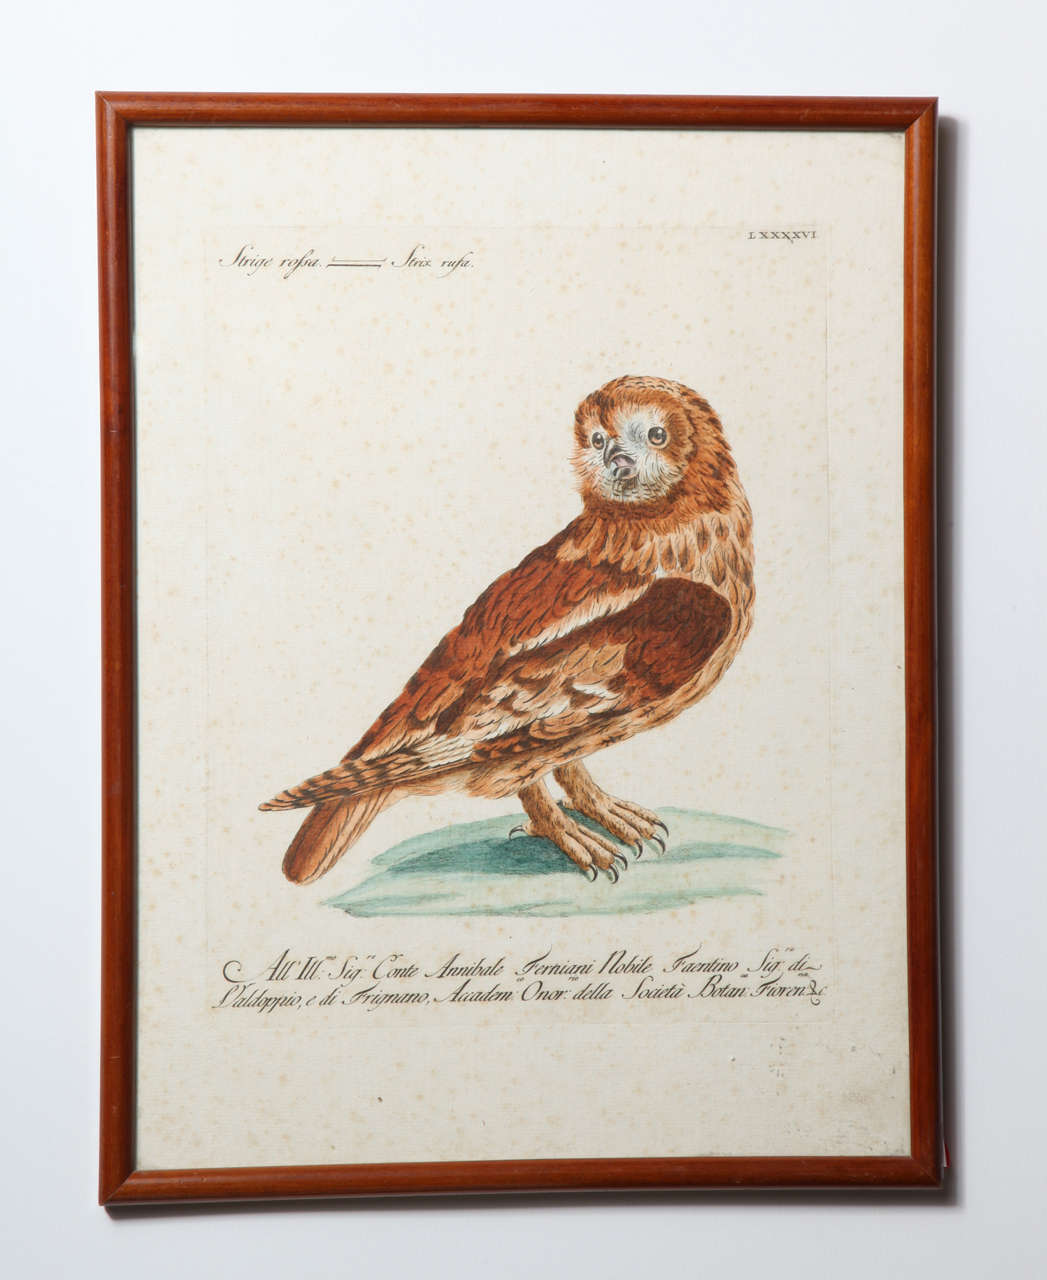 French A 19th Century Owl Etching by G. Hullmandel, after J. Gould. France